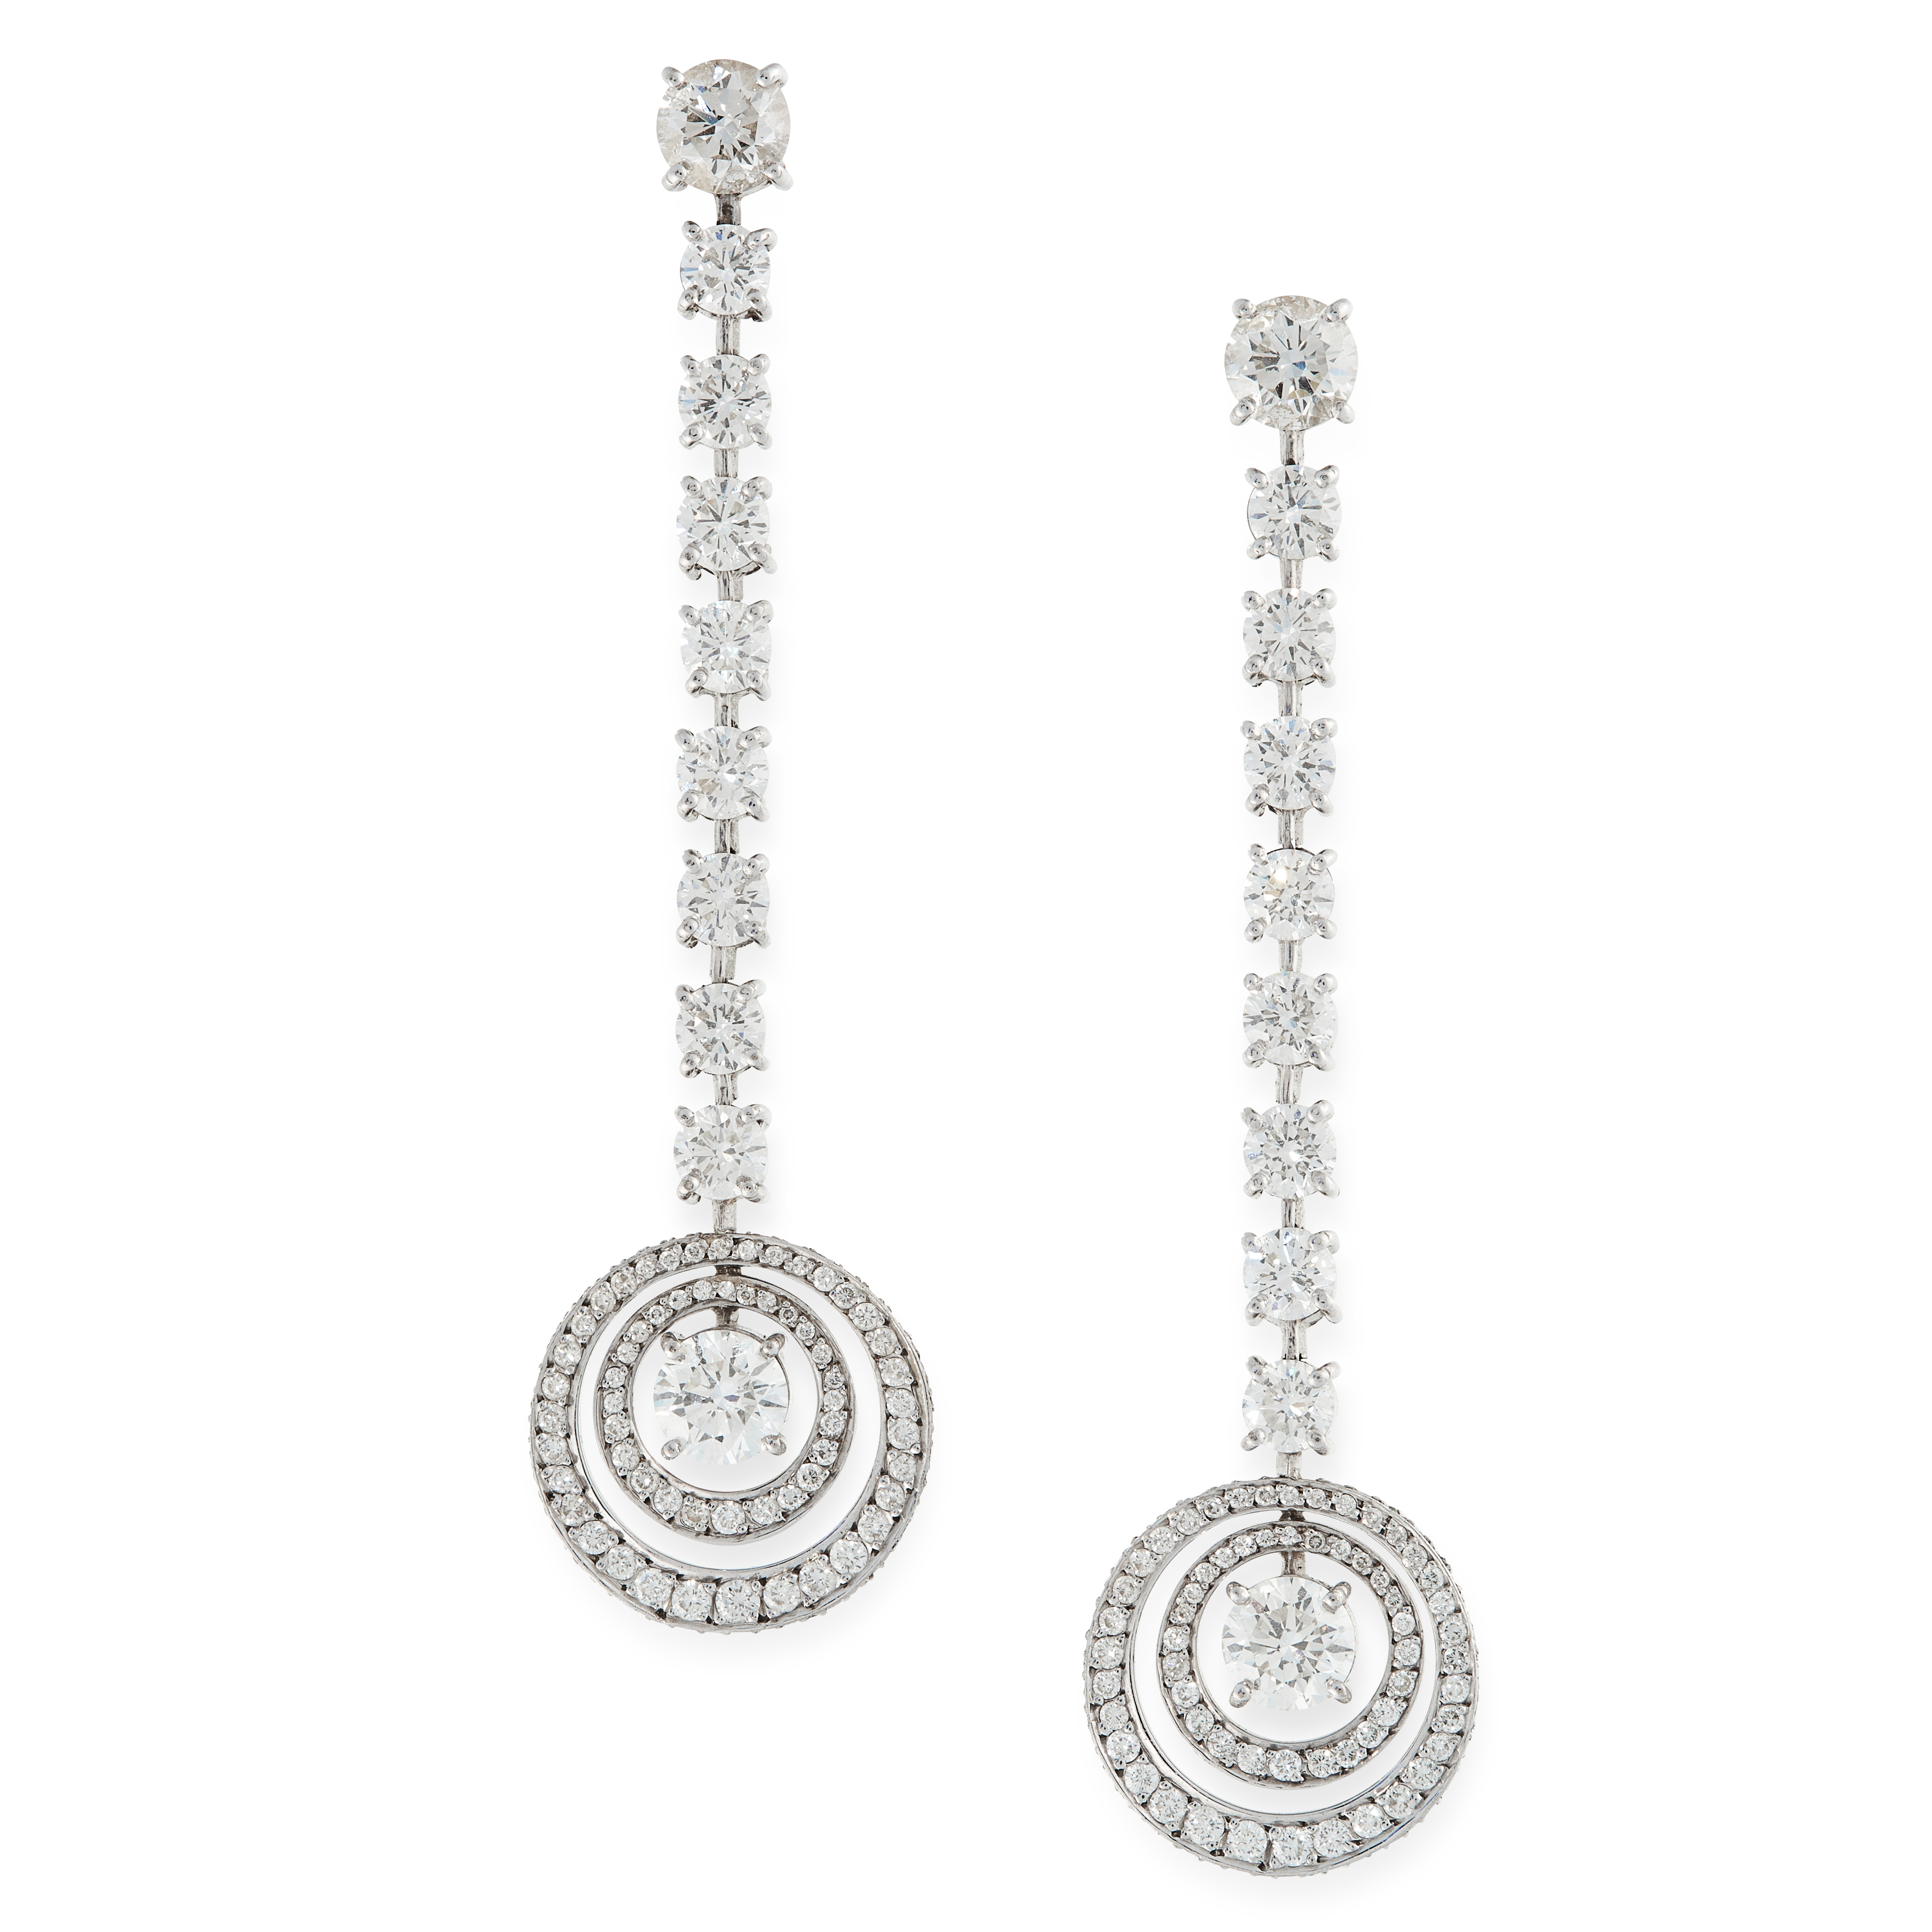 A PAIR OF DIAMOND DROP EARRINGS each set with two principal round cut diamonds of 0.50 carats